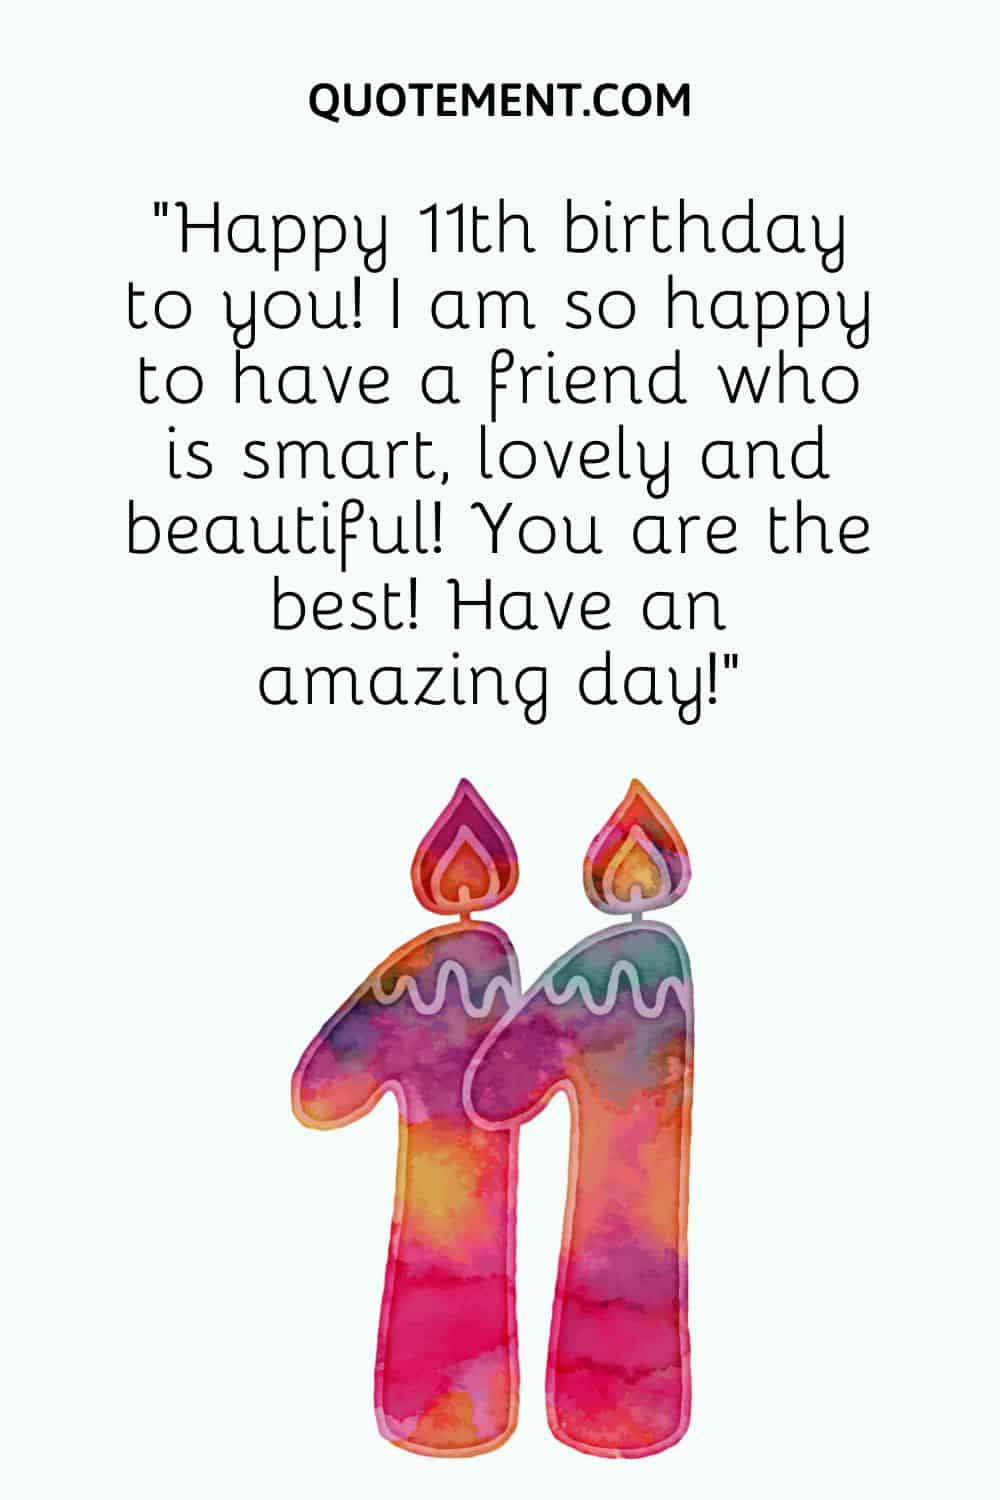 “Happy 11th birthday to you! I am so happy to have a friend who is smart, lovely and beautiful! You are the best! Have an amazing day!”